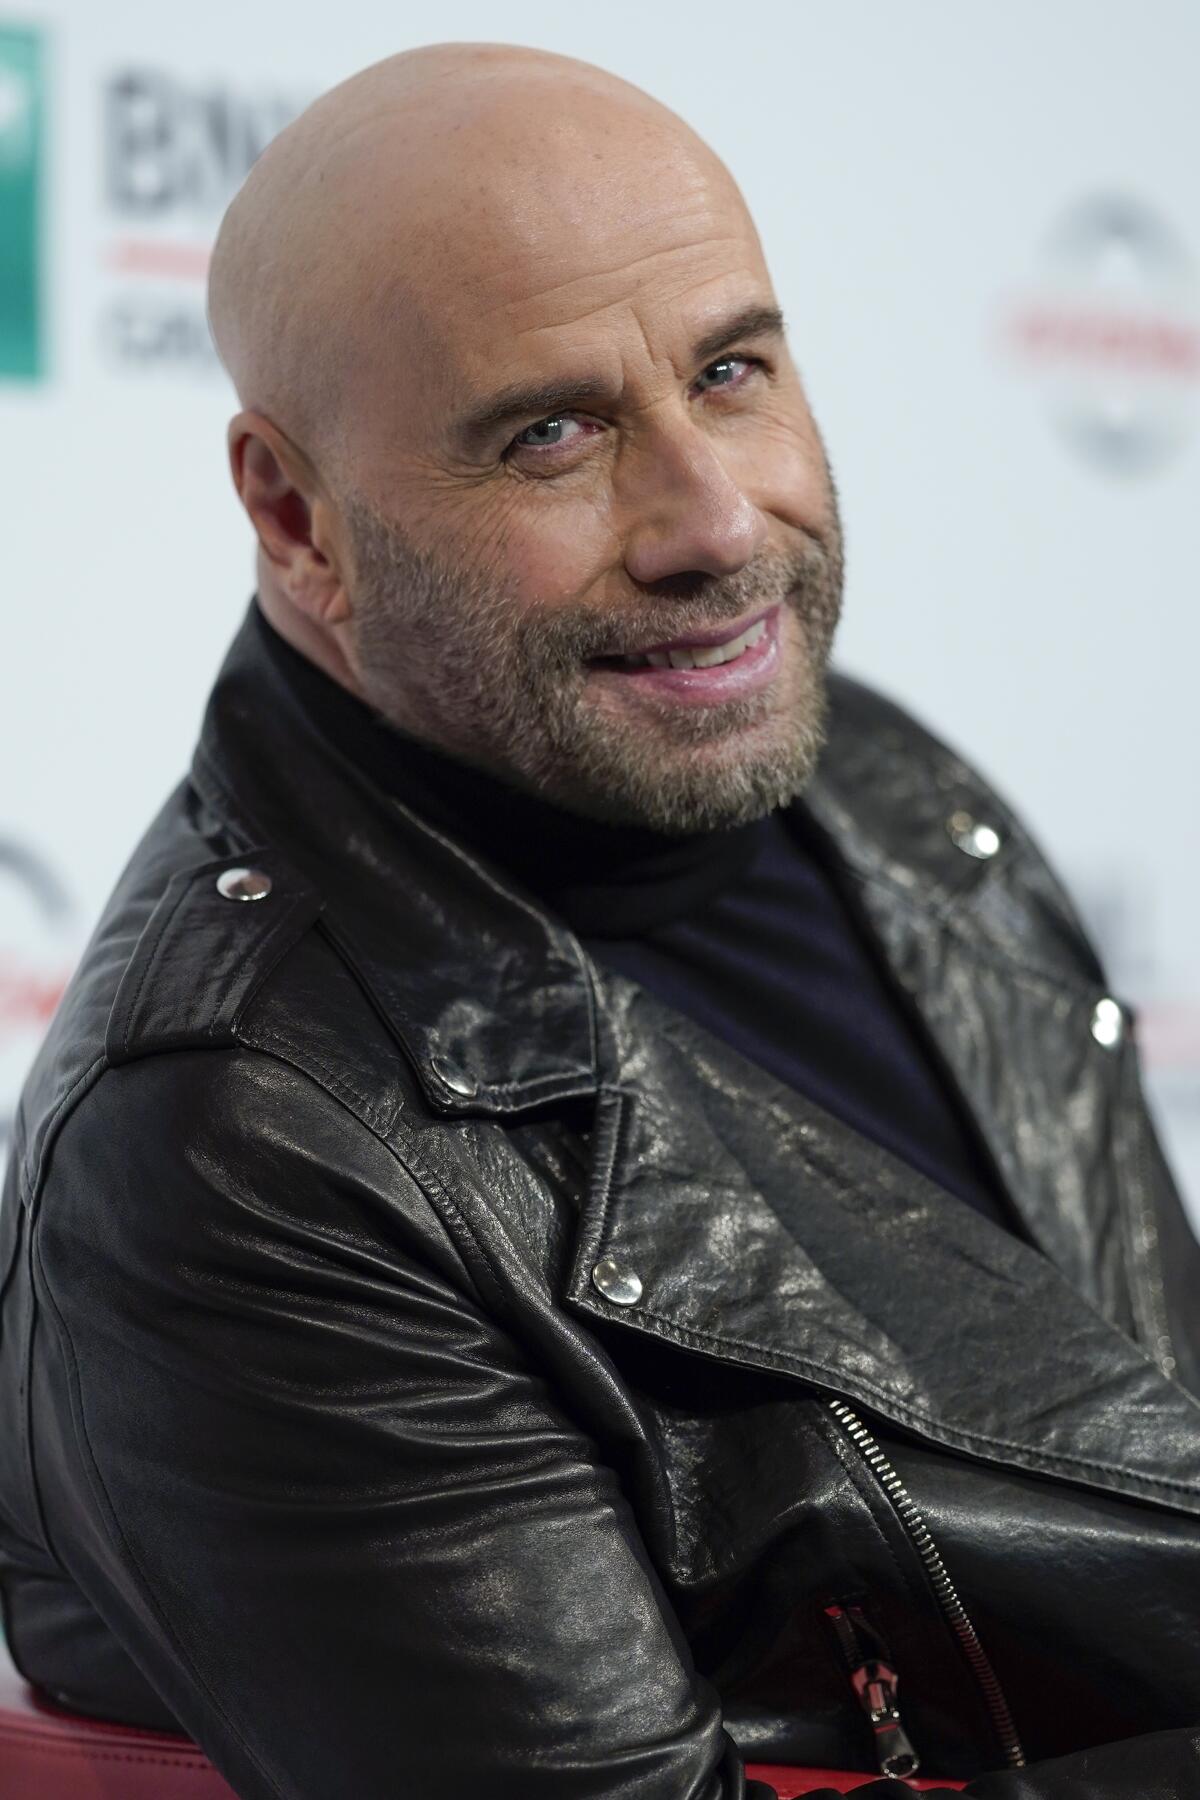 John Travolta looks to the side and smiles while wearing a black leather jacket